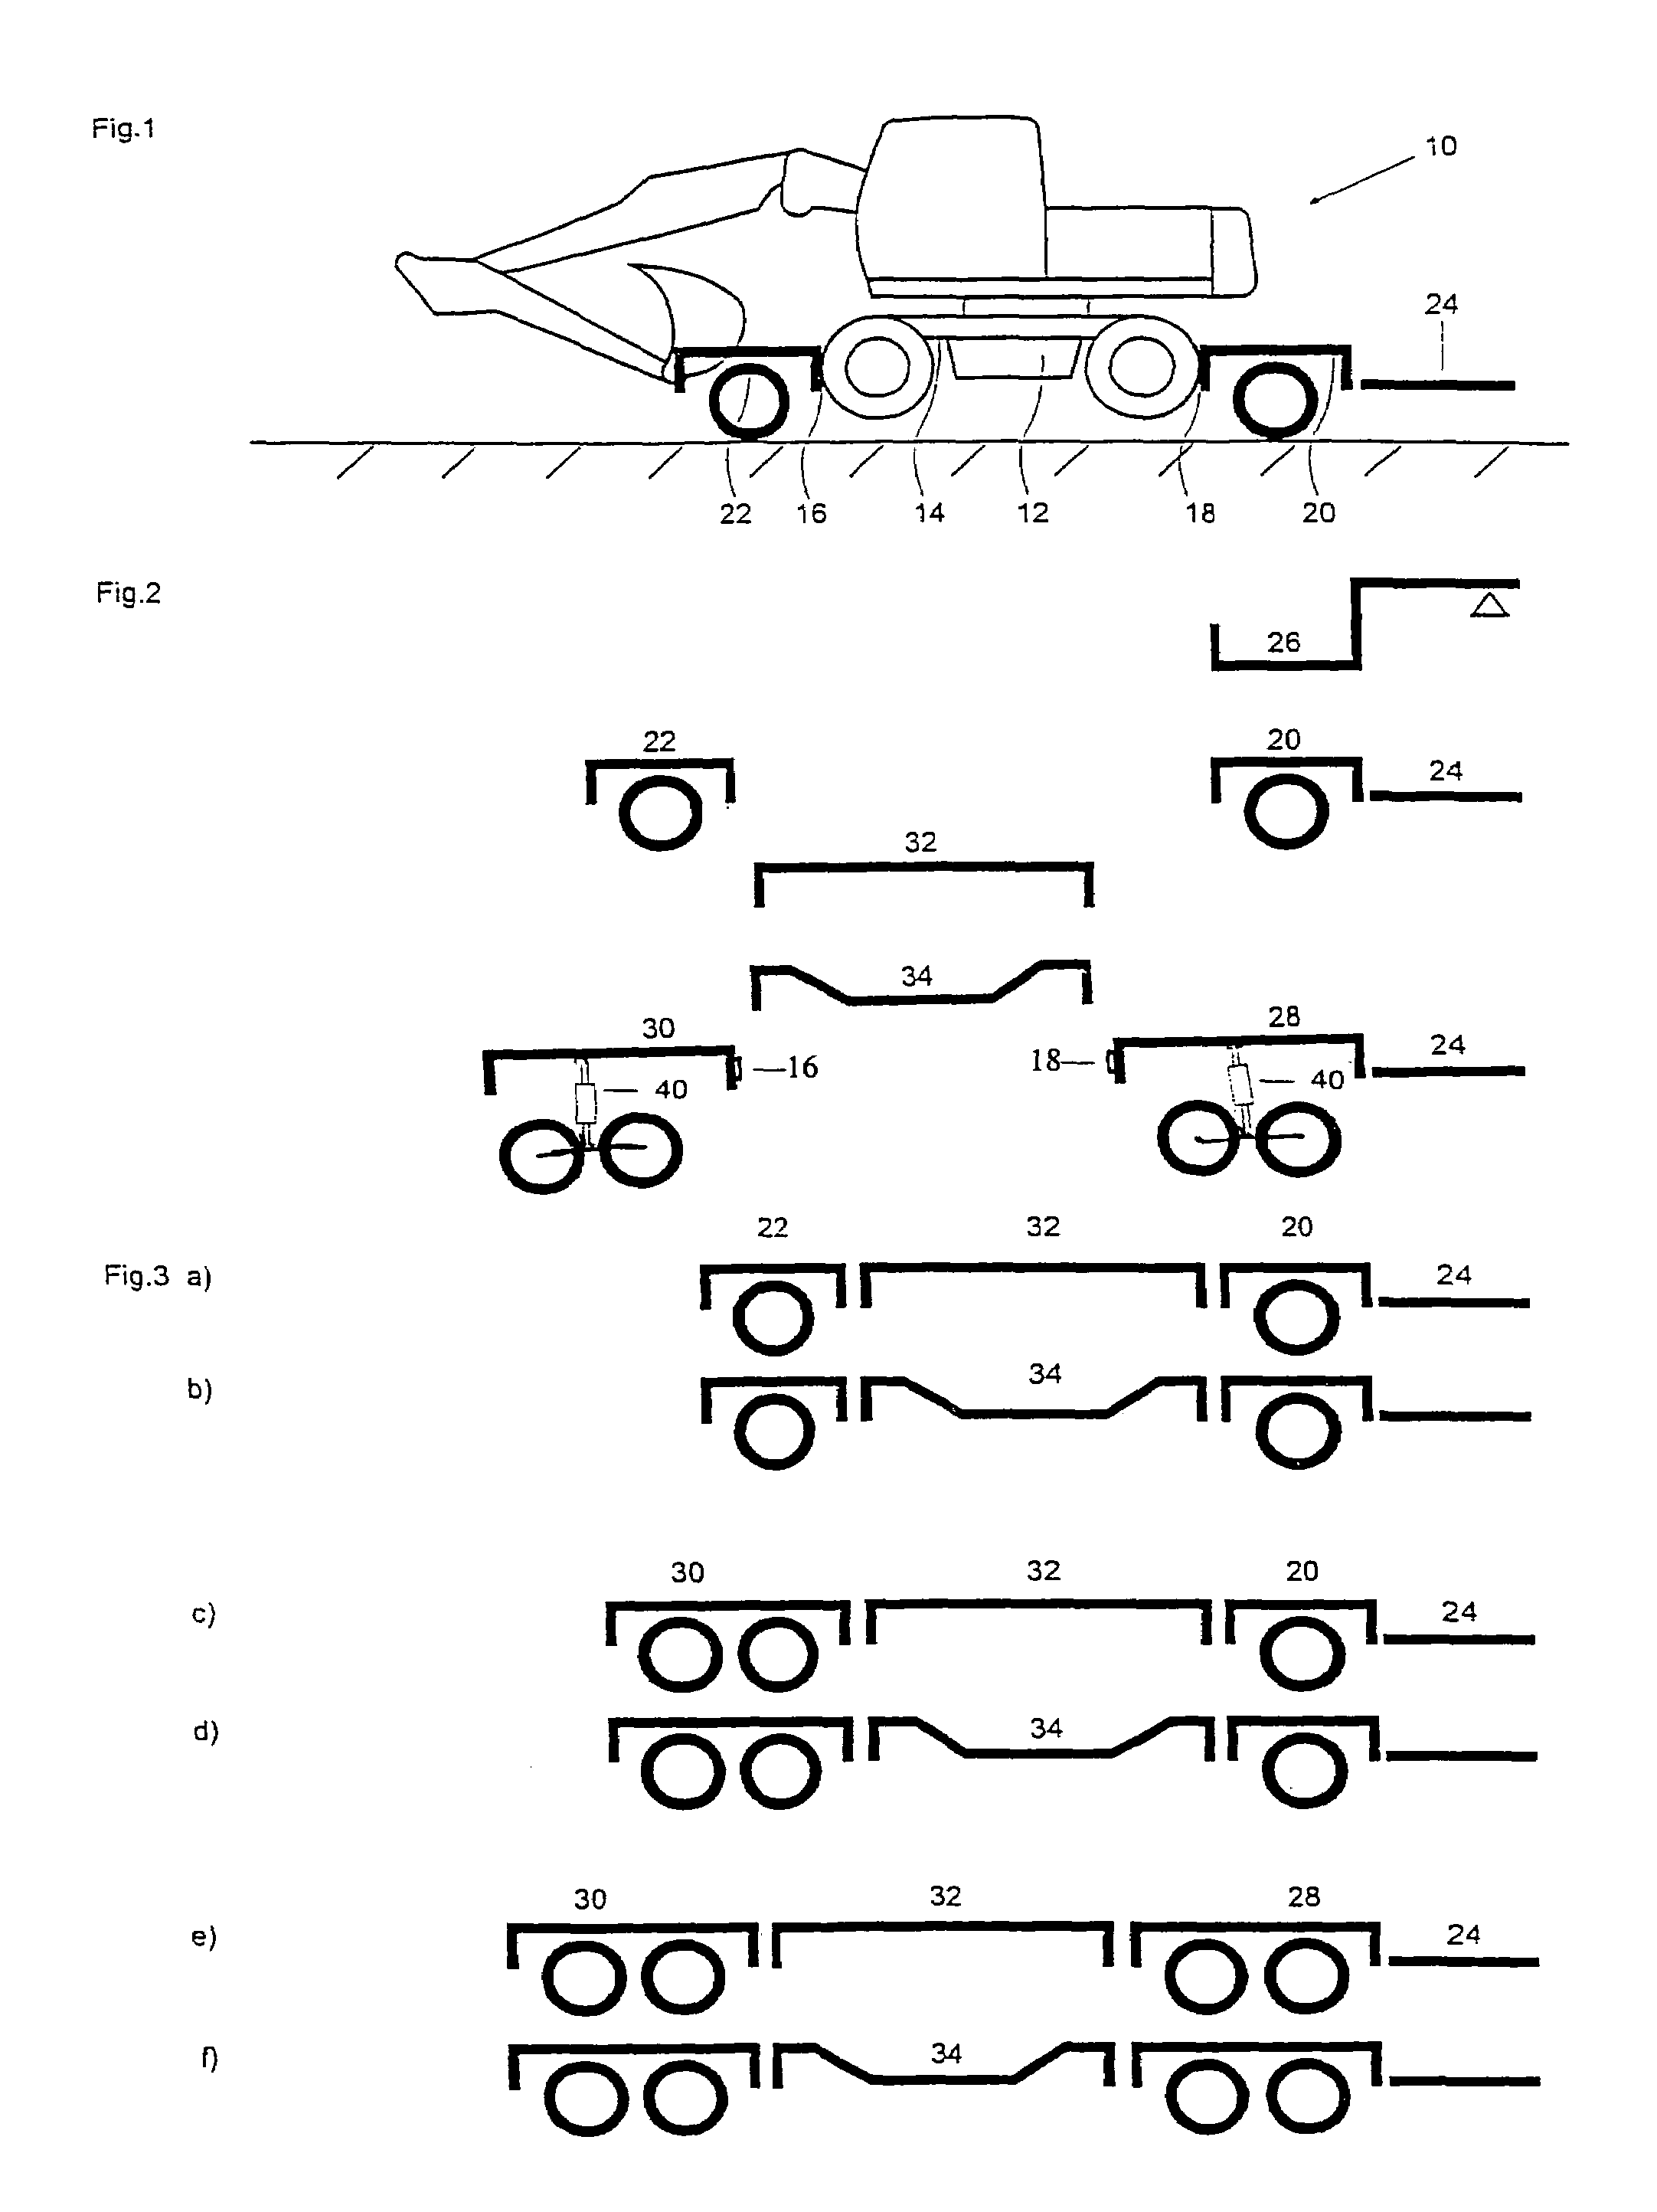 System for the transportation of construction machines, preferably excavators